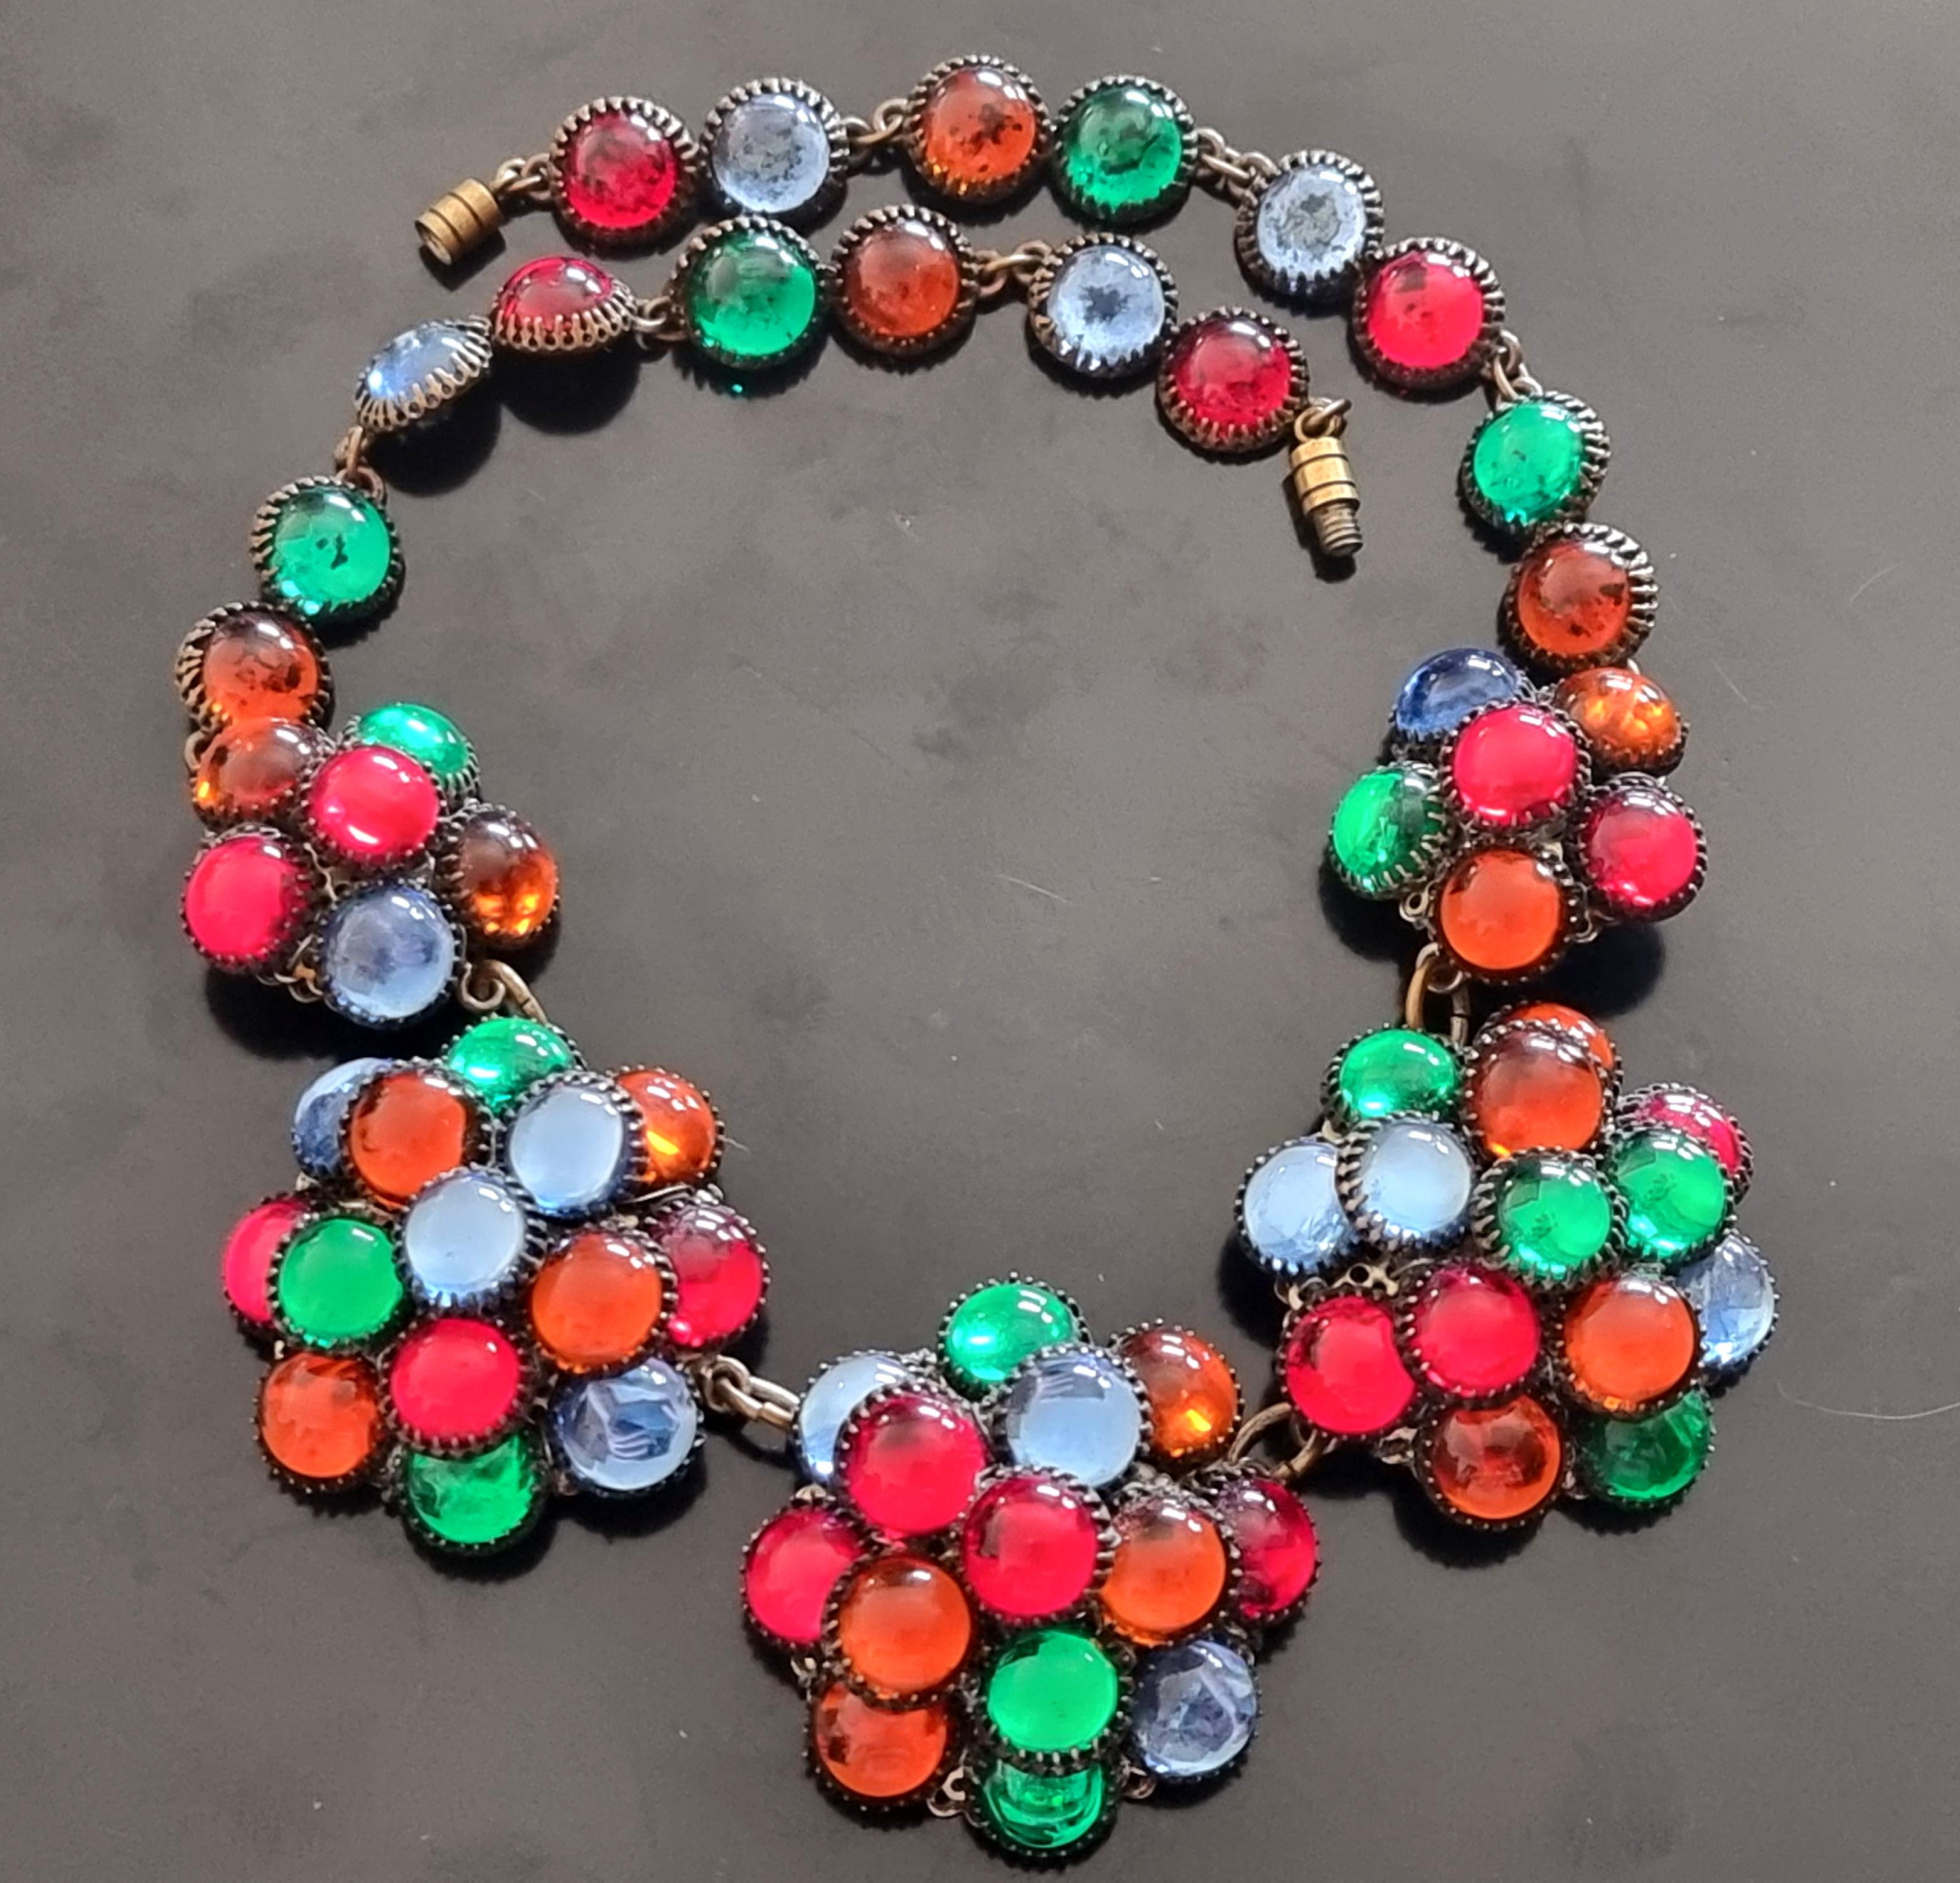 Beautiful old NECKLACE,
50s vintage,
multi-colored glass cabochons,
High Fashion designer CIS countess Cissy ZOLTOWSKA,
total length 39 cm, height 3.5 cm, weight 66 g,
good condition.

Countess Cissy Zoltowska - a name synonymous with elegance and